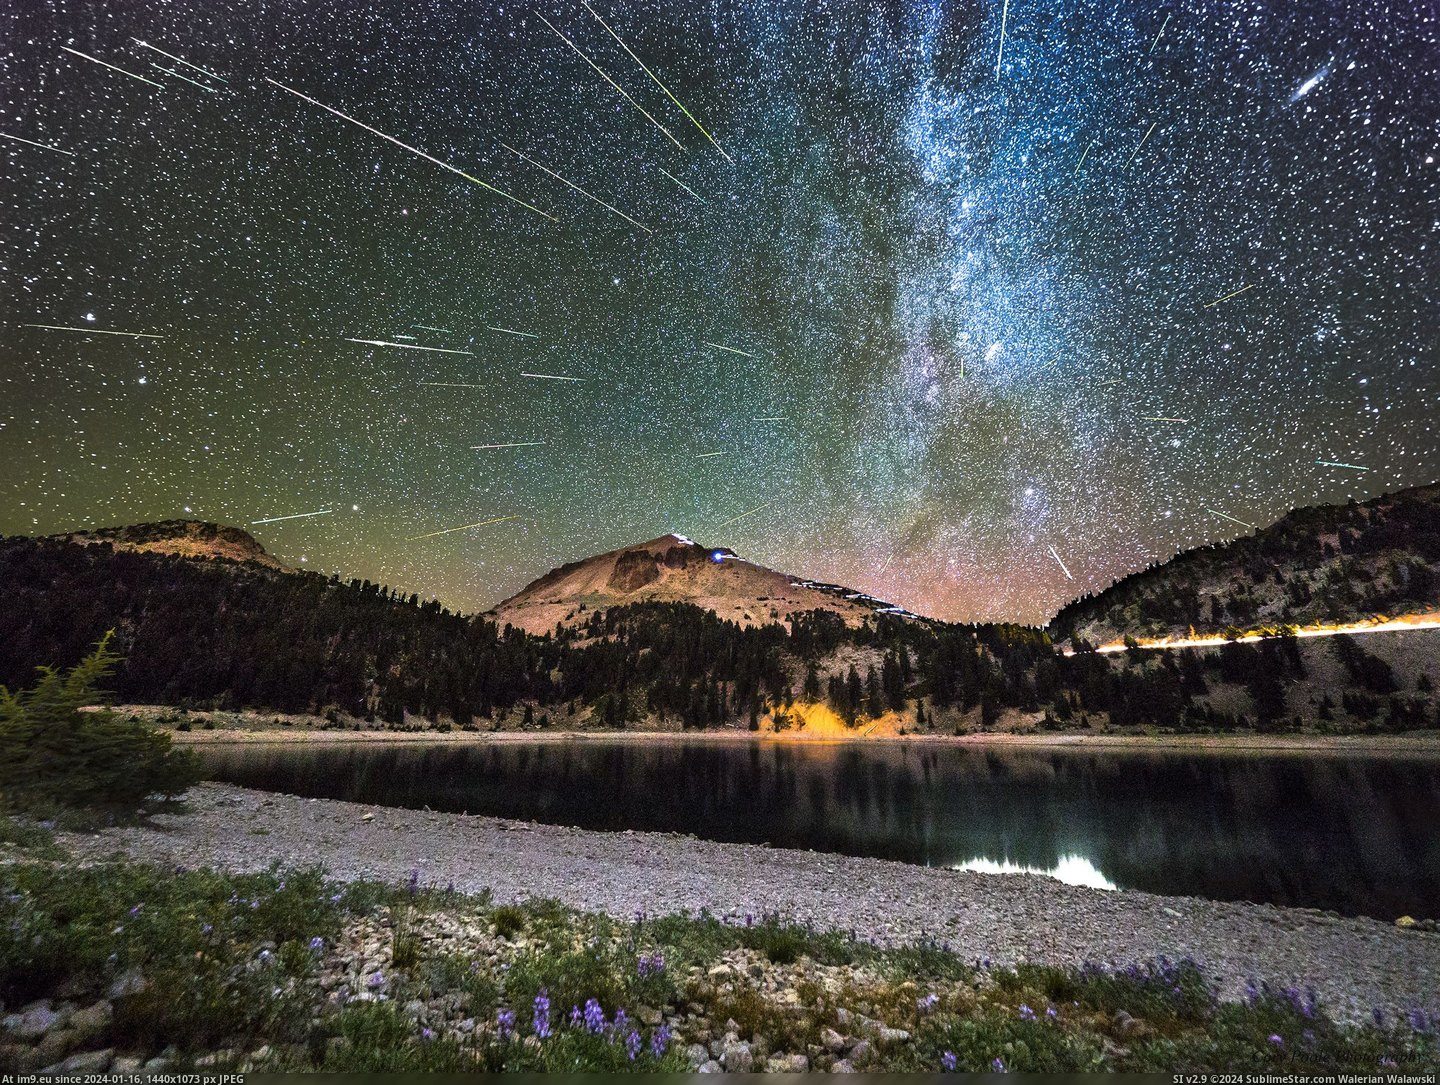 #Years #Happy #Northern #Lassen #Composite #Peak #Eve #Fireworks [Earthporn] Happy New Years Eve! Here's some celestial fireworks, a composite of 40 meteors over Lassen Peak in Northern Califor Pic. (Изображение из альбом My r/EARTHPORN favs))